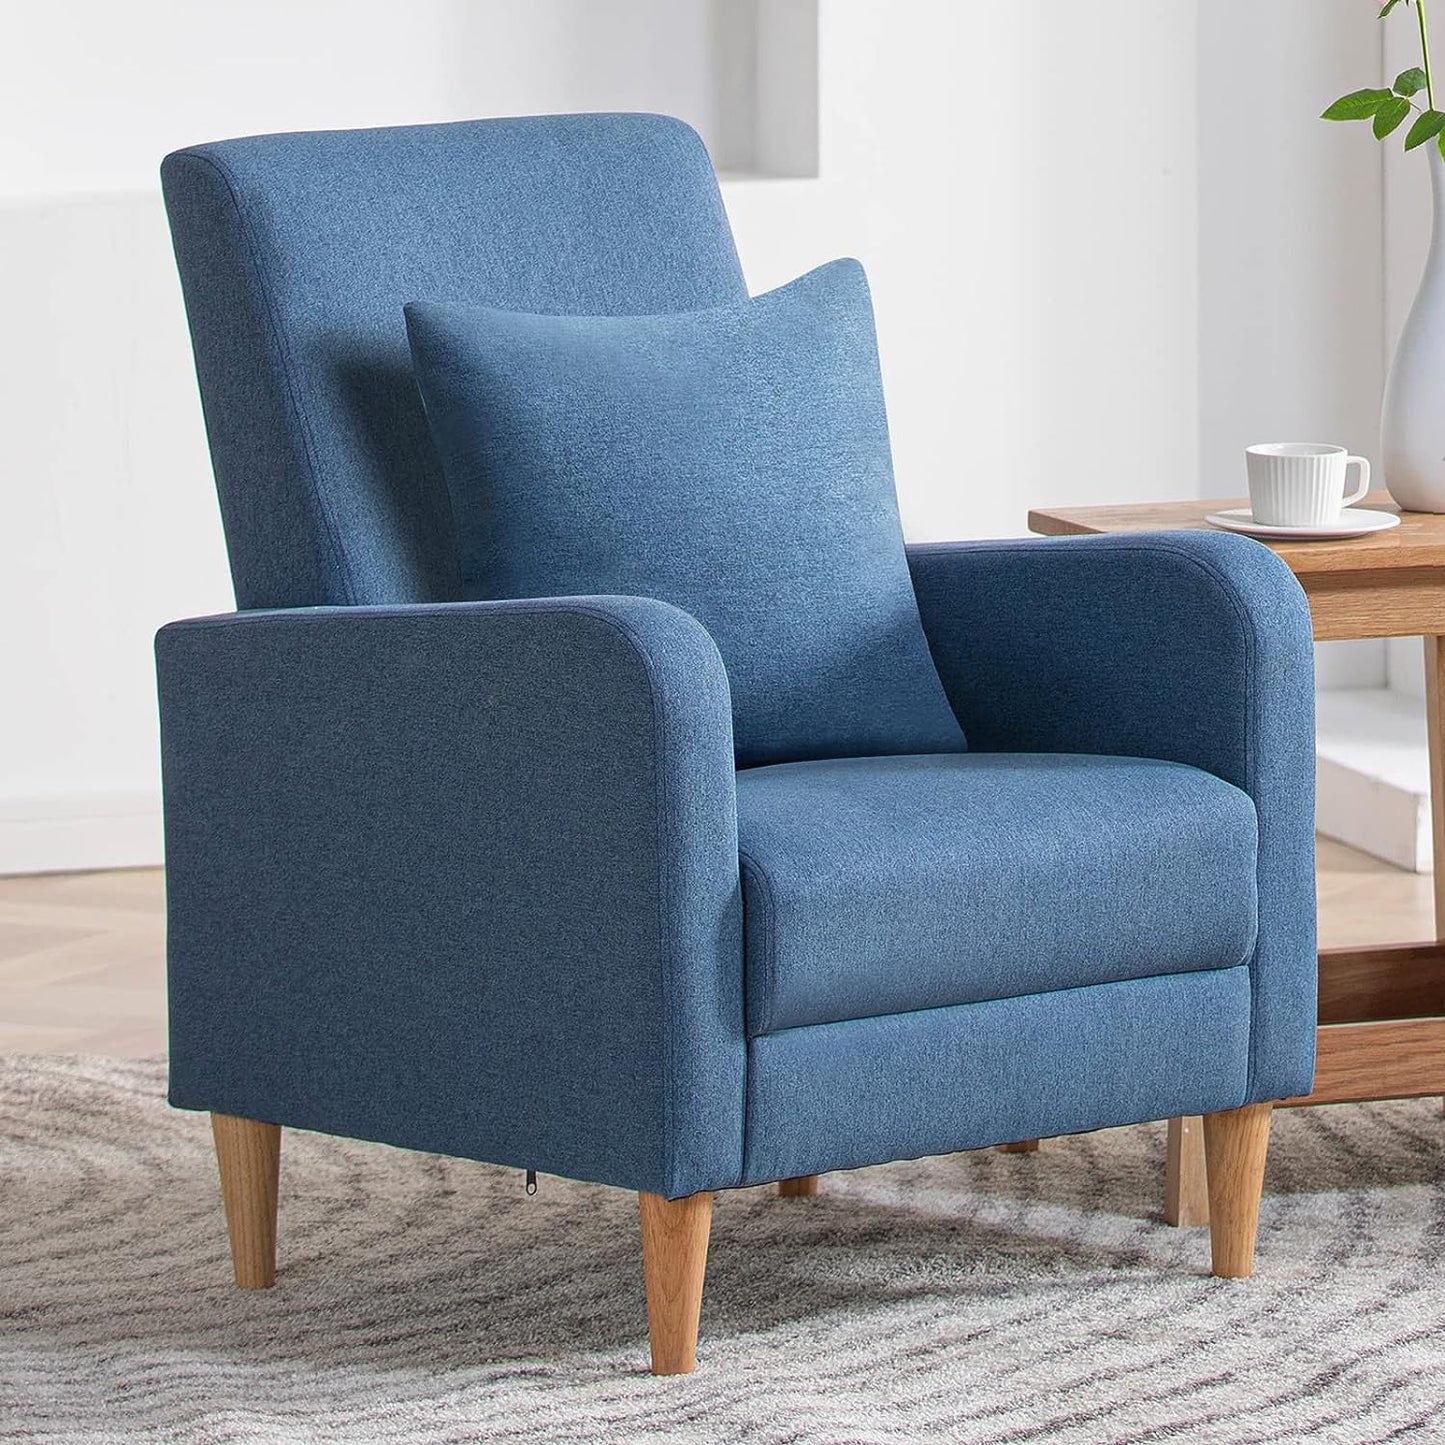 Modern Upholstered Accent Chair Armchair with Pillow, Fabric Reading Living Room Side Chair,Single Sofa with Lounge Seat and Wood Legs, Blue